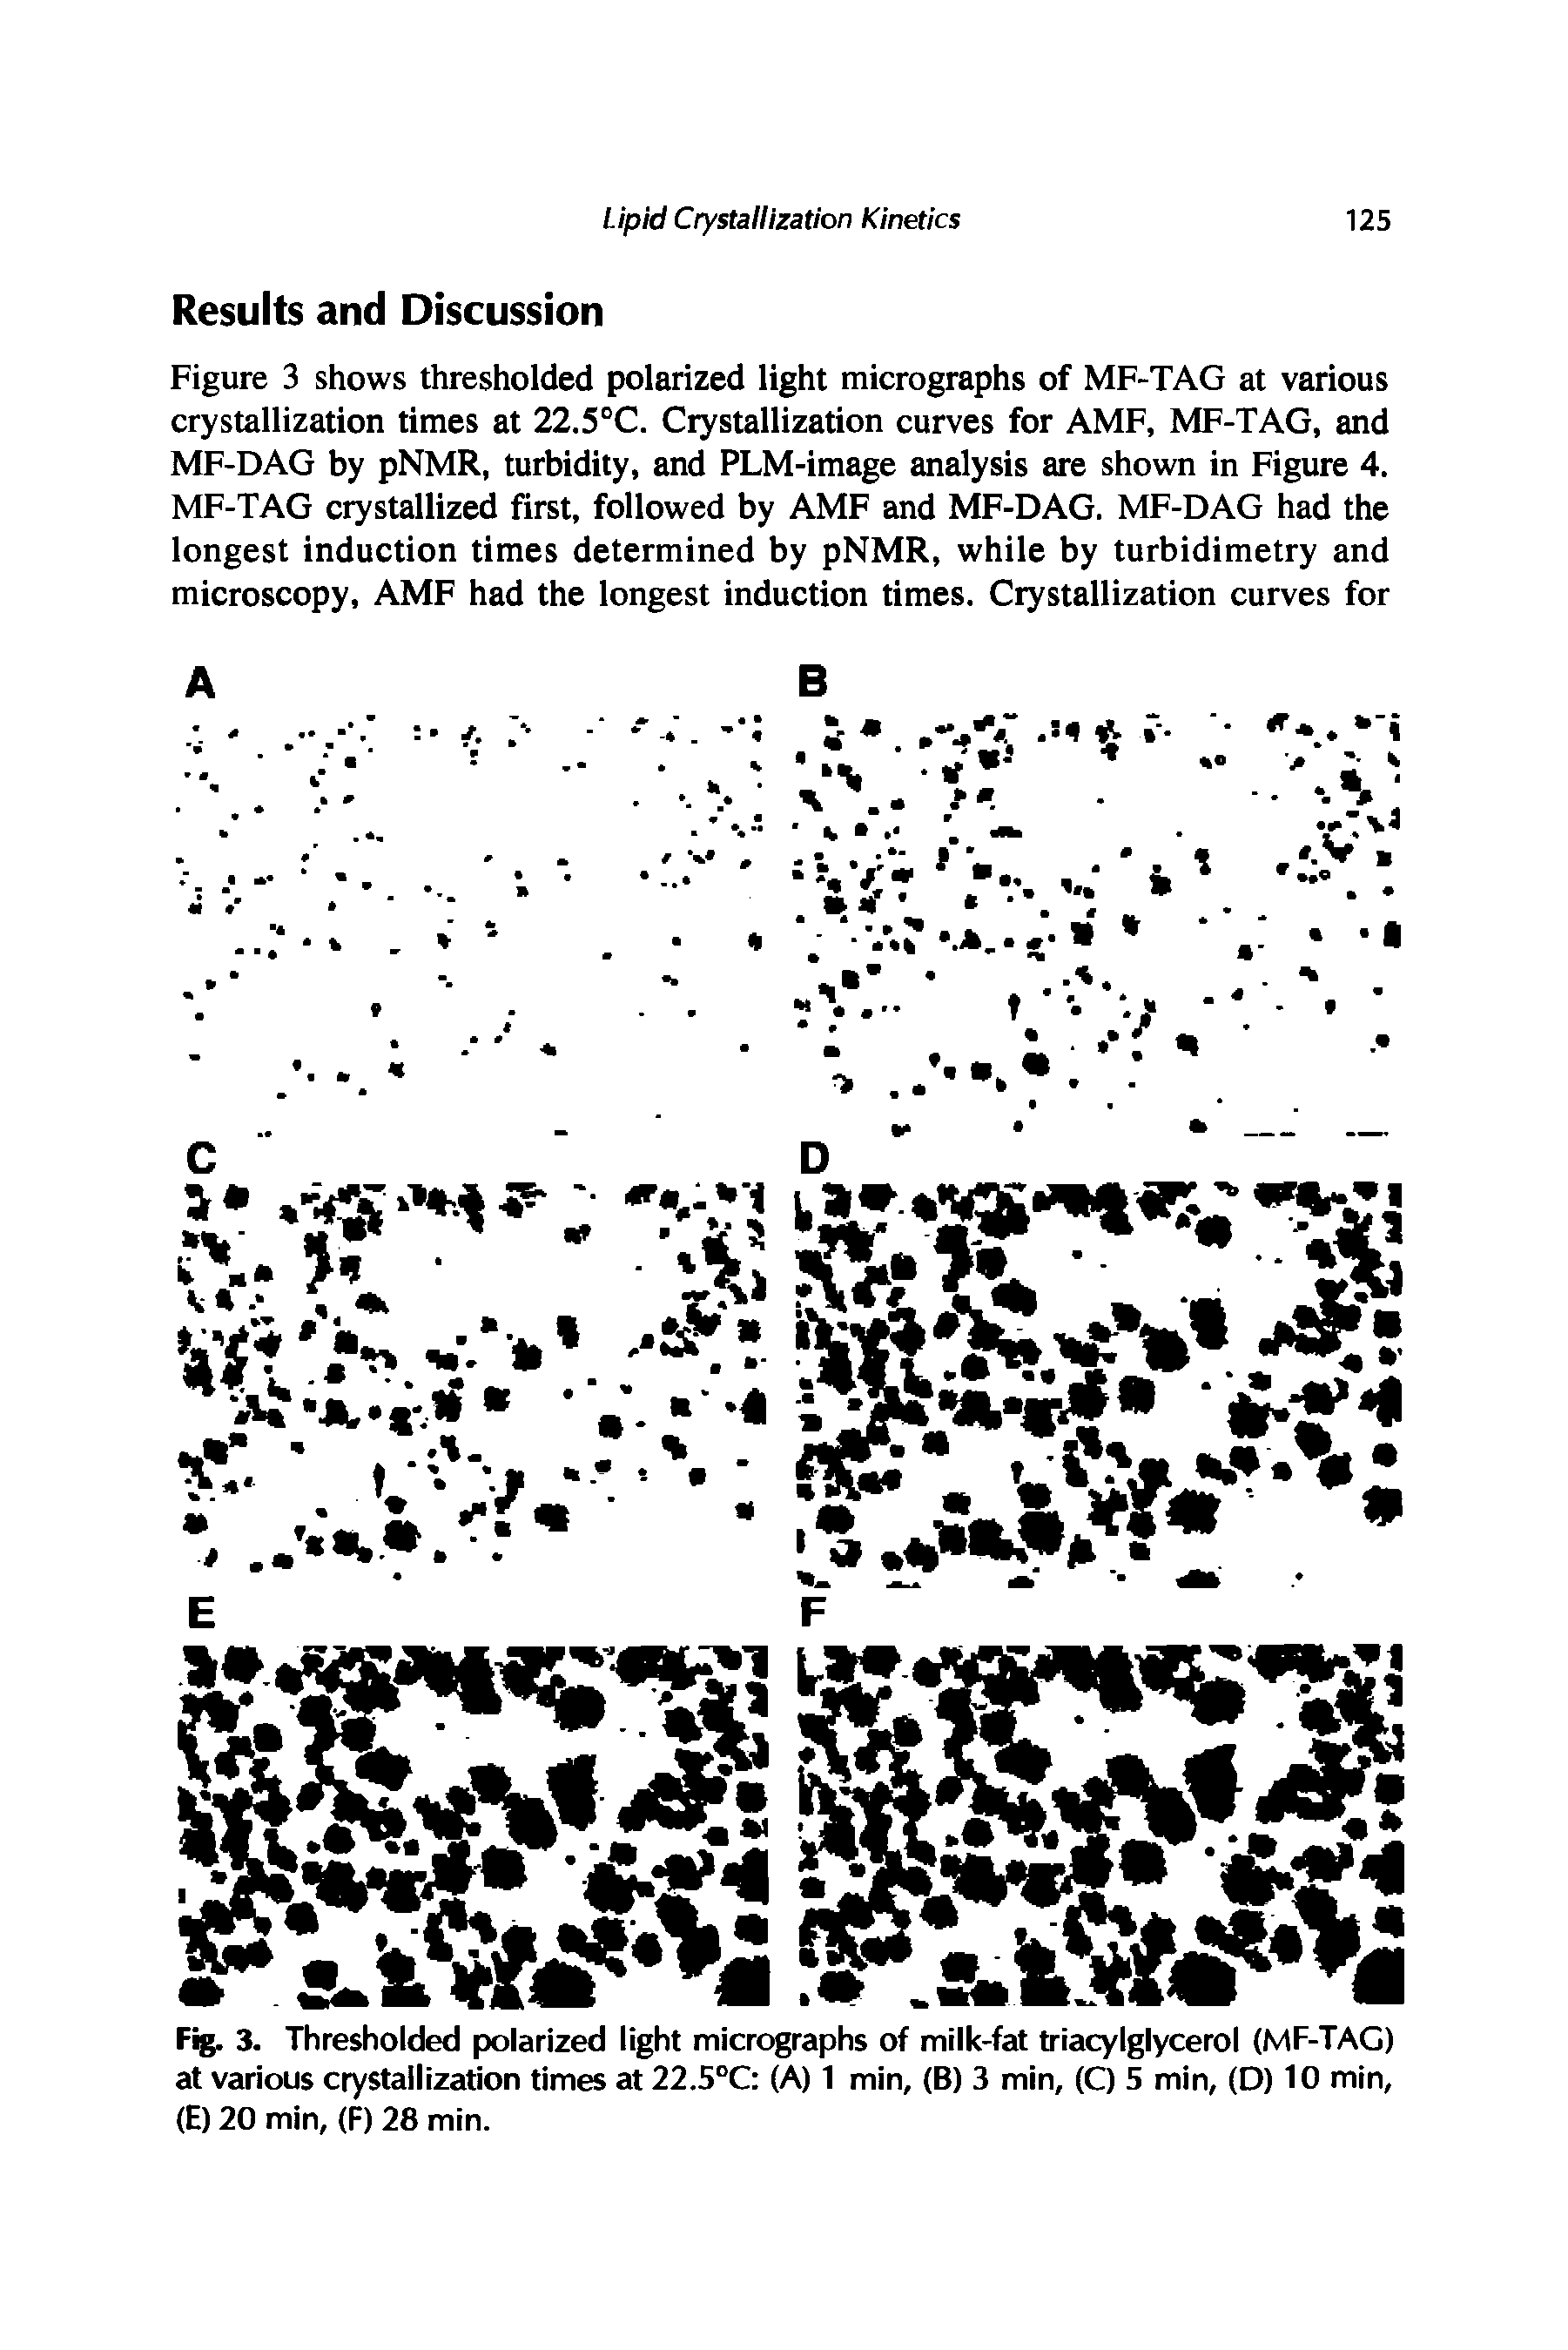 Figure 3 shows thresholded polarized light micrographs of MF-TAG at various crystallization times at 22.5°C. Crystallization curves for AMF, MF-TAG, and MF-DAG by pNMR, turbidity, and PLM-image analysis are shown in Figure 4. MF-TAG crystallized first, followed by AMF and MF-DAG. MF-DAG had the longest induction times determined by pNMR, while by turbidimetry and microscopy, AMF had the longest induction times. Crystallization curves for...